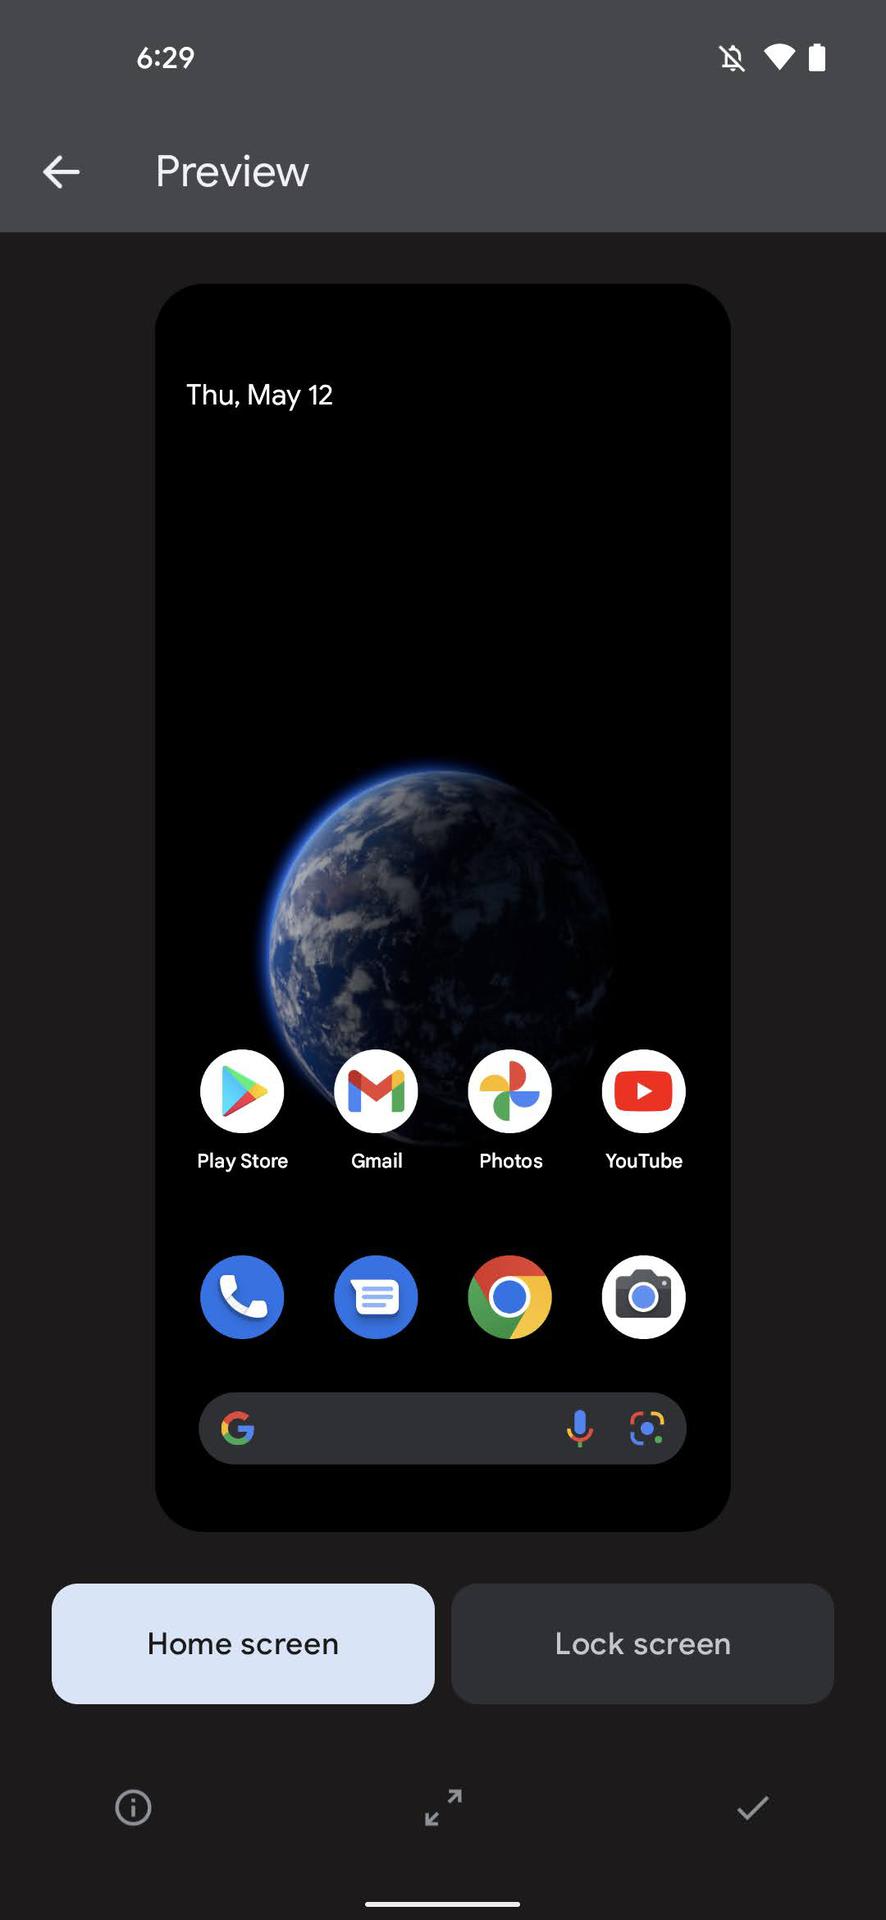 How to set live wallpaper on Android 5